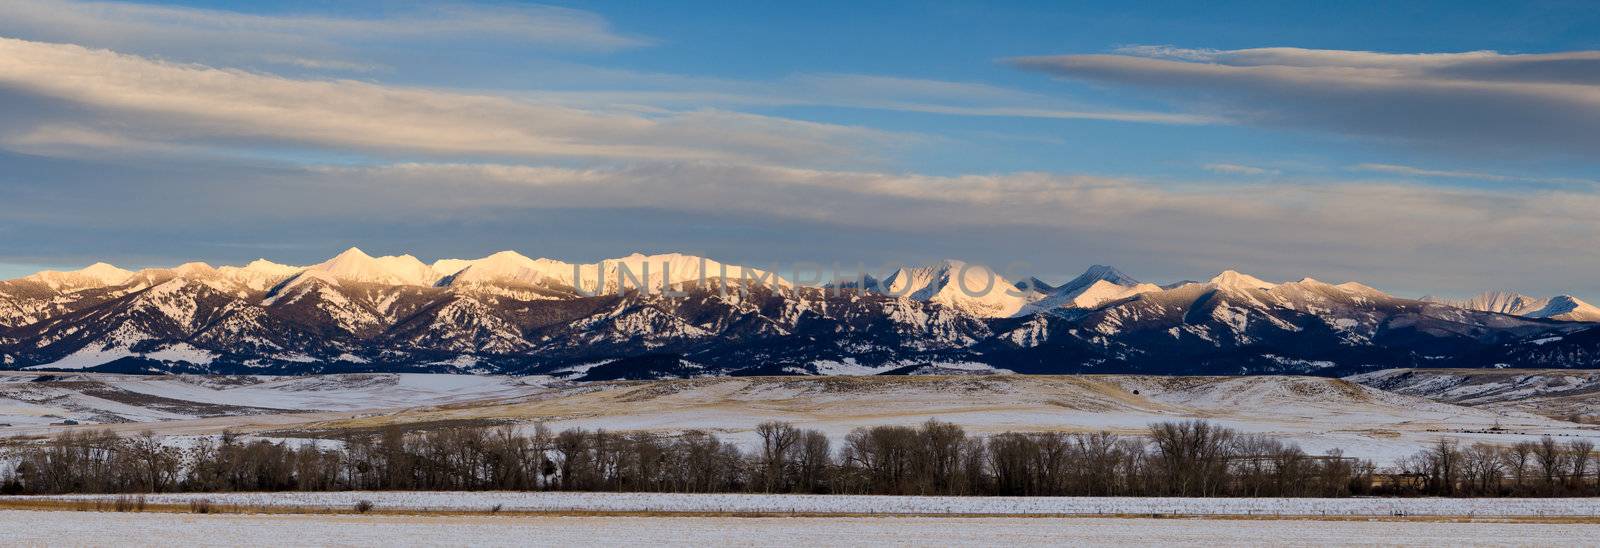 The Crazy Mountains in winter, Park County, Montana, USA